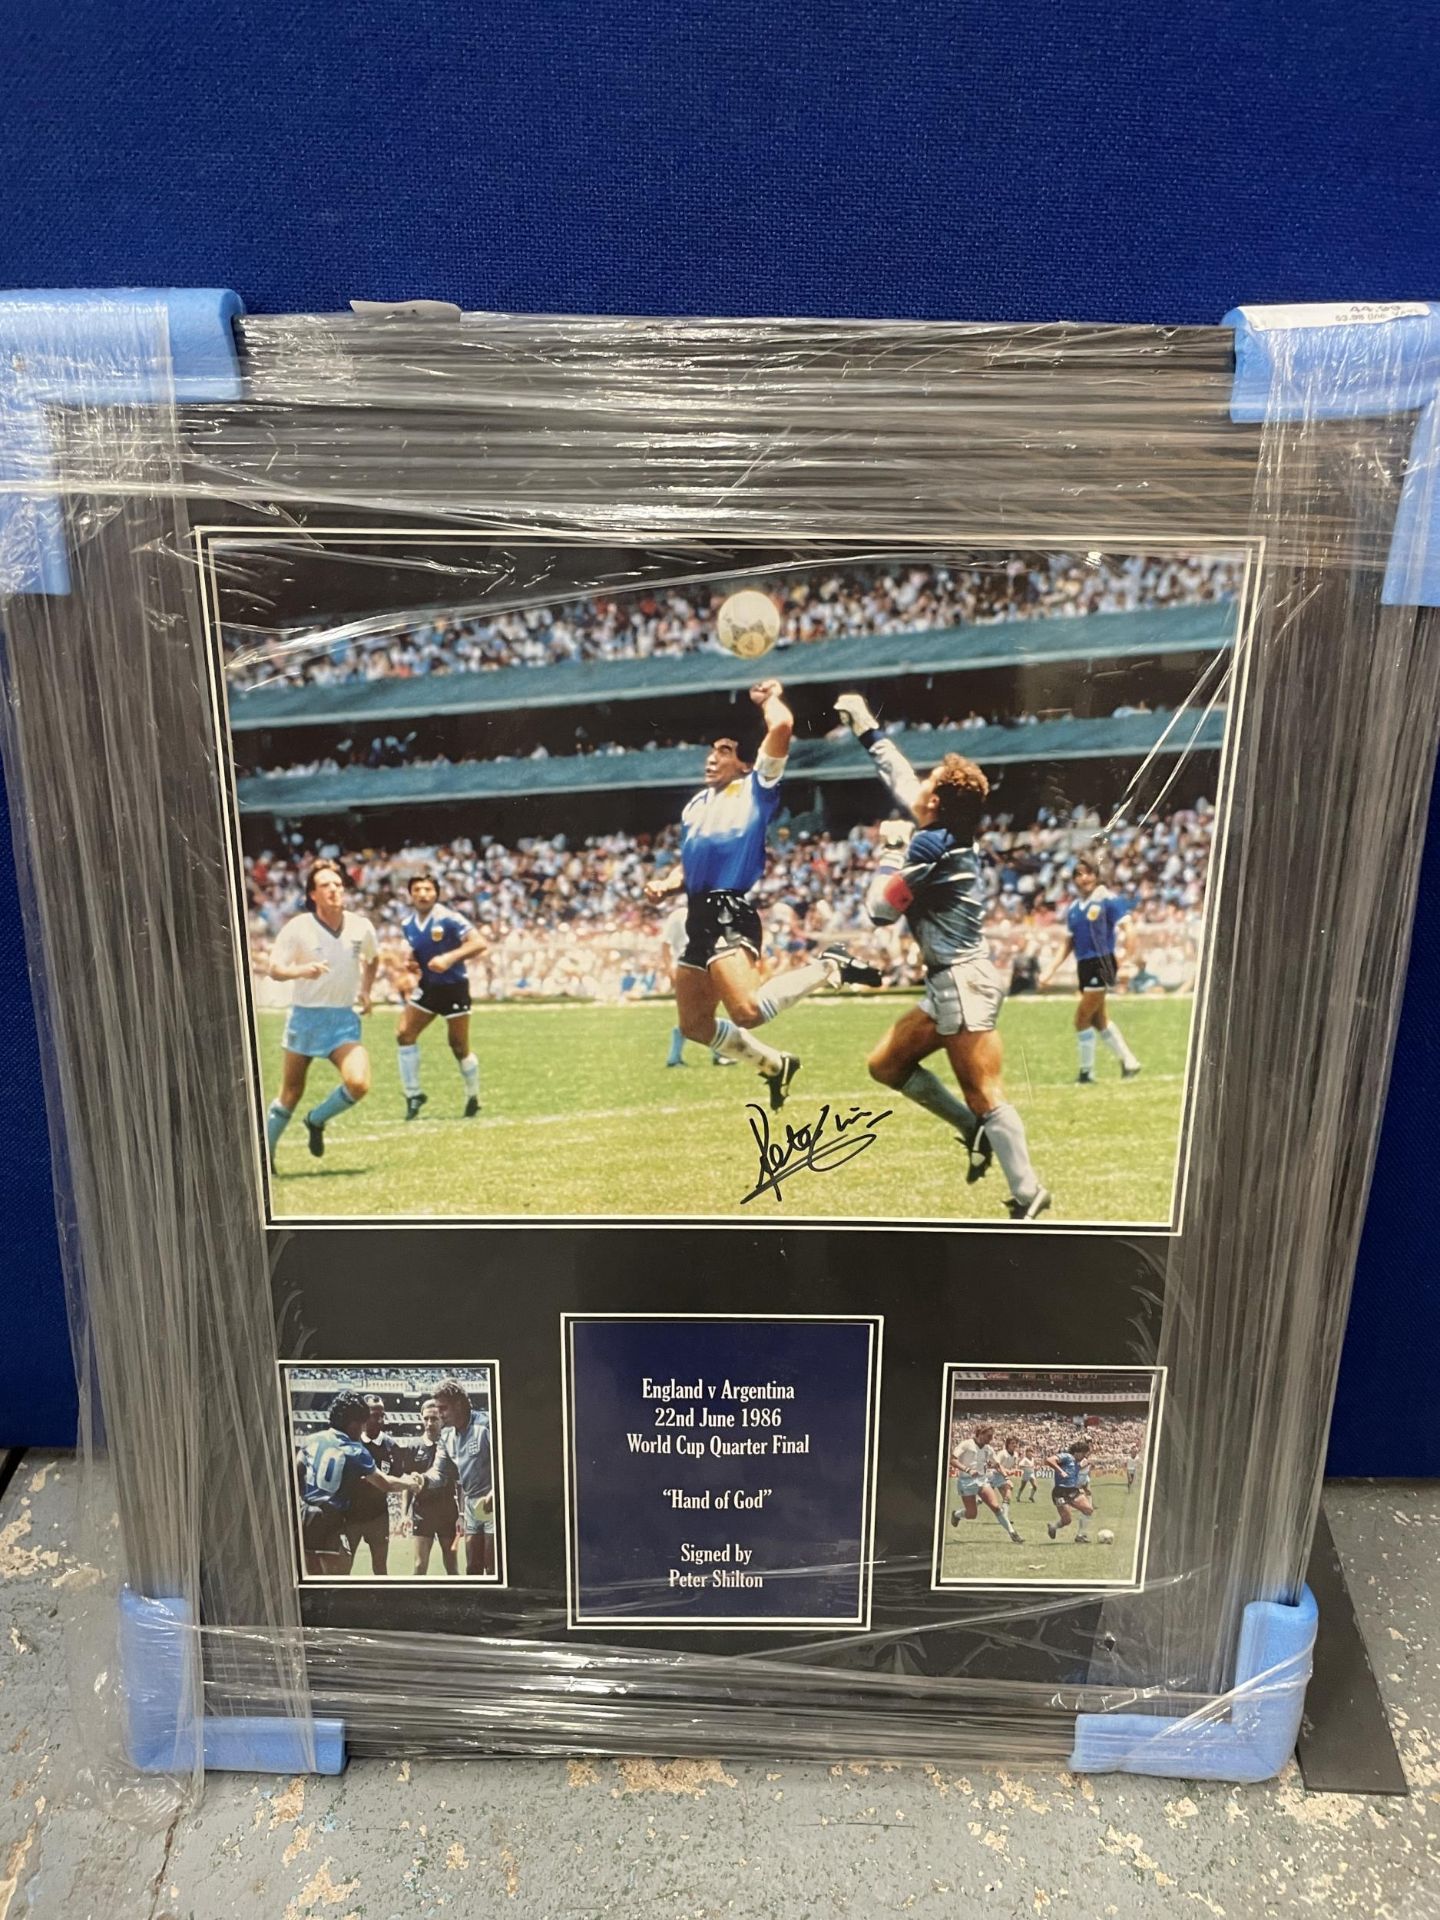 A FRAMED 1986 WORLD CUP 'HAND OF GOD' PHOTO SIGNED BY PETER SHILTON, WITH ALL STAR SIGNINGS